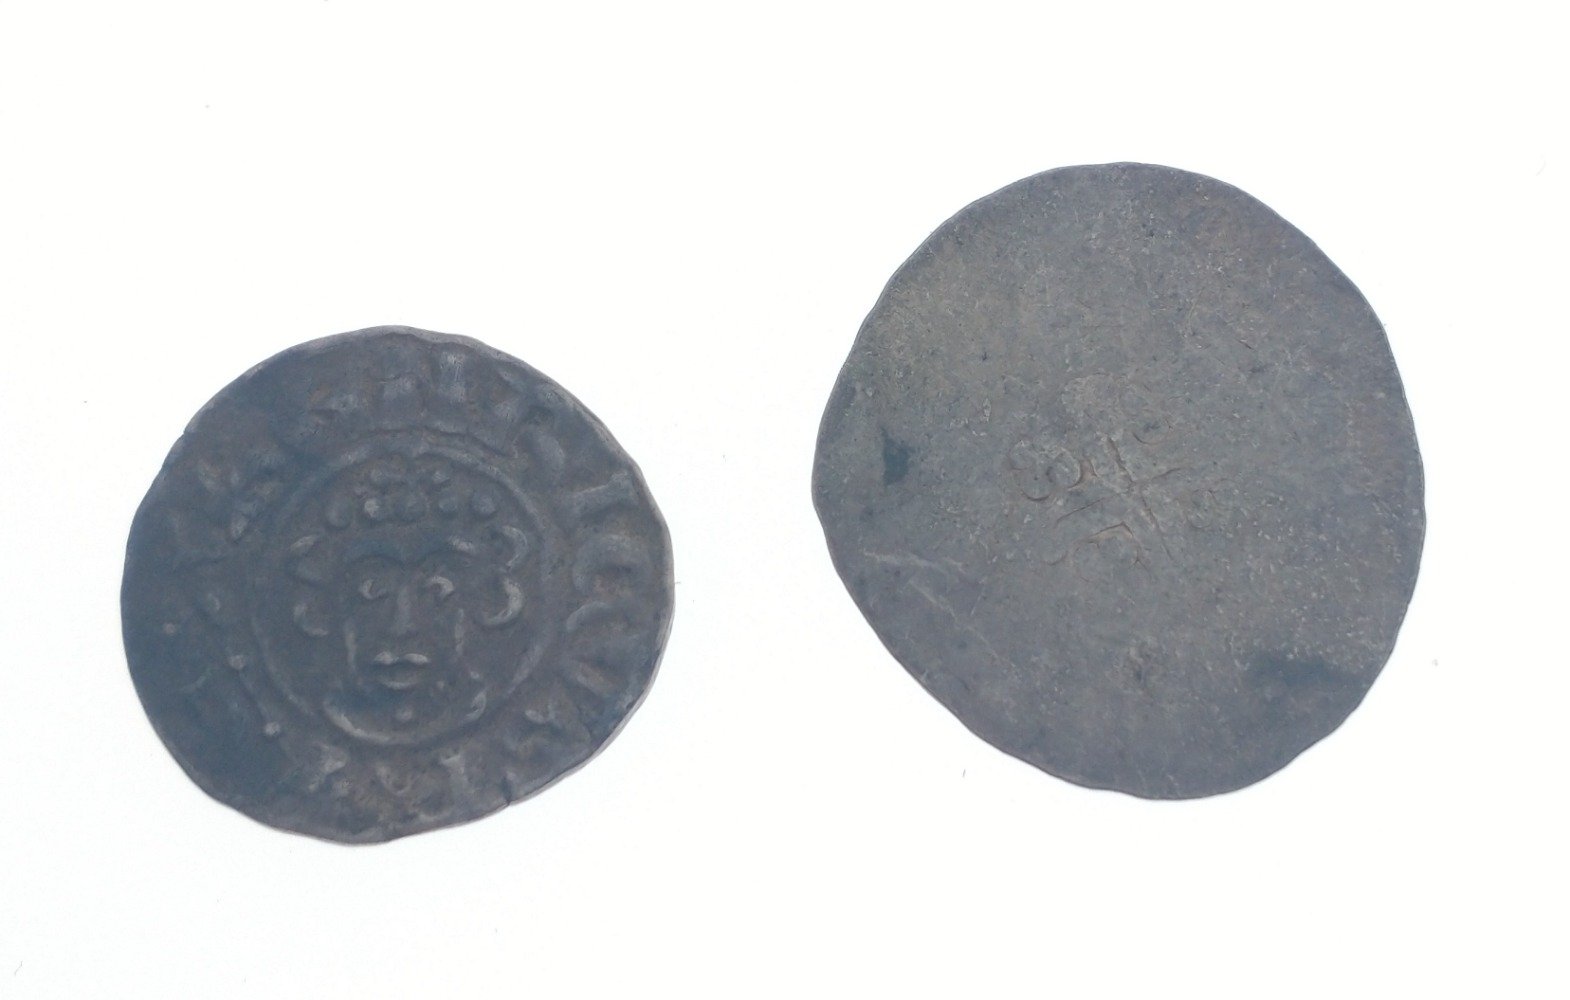 ANCIENT ENGLISH HAMMERED Cnut, penny, short cross type 19-20mm diameter slightly uneven hammered - Image 4 of 4